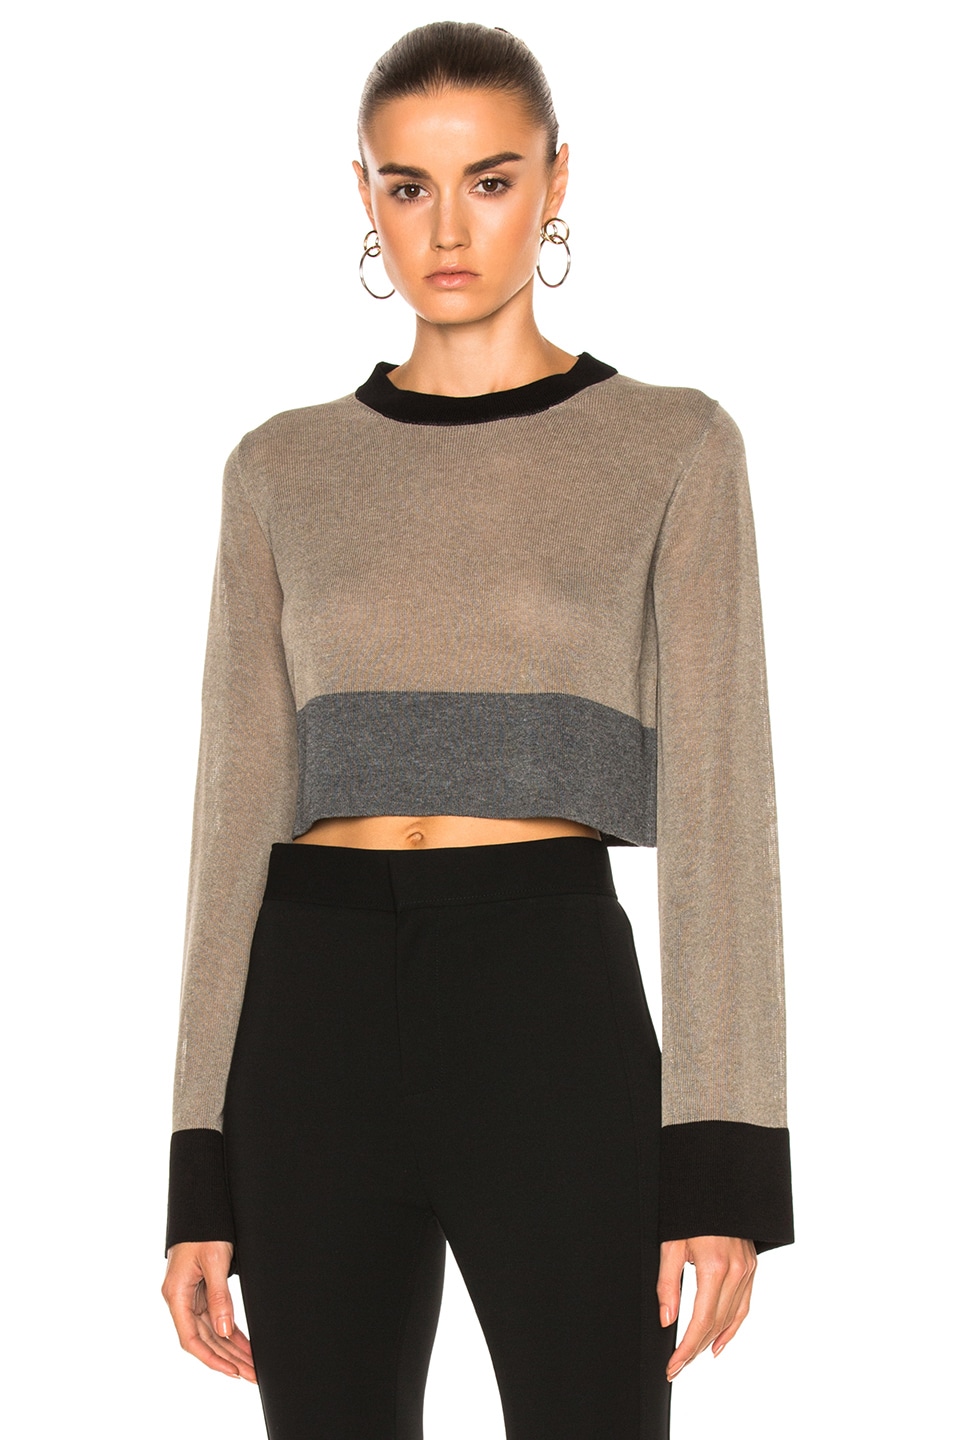 Image 1 of Soyer Pippo Cropped Top in Ash, Birch & Black